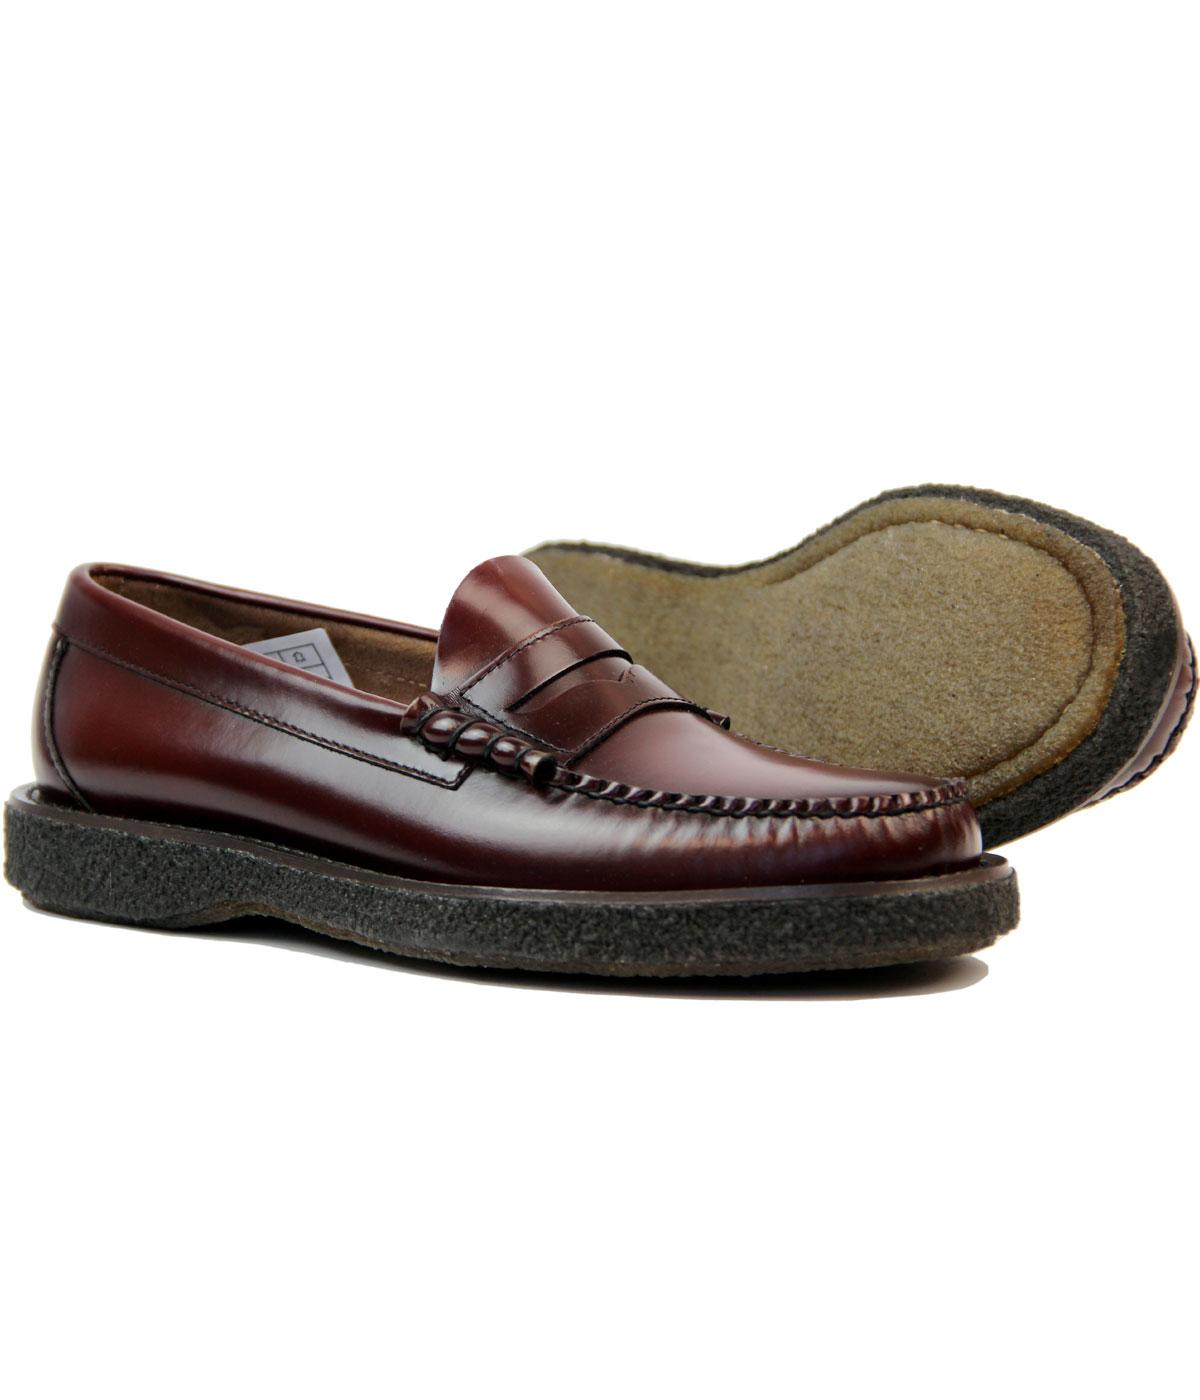 Crepe Sole Penny Loafer Shoes 